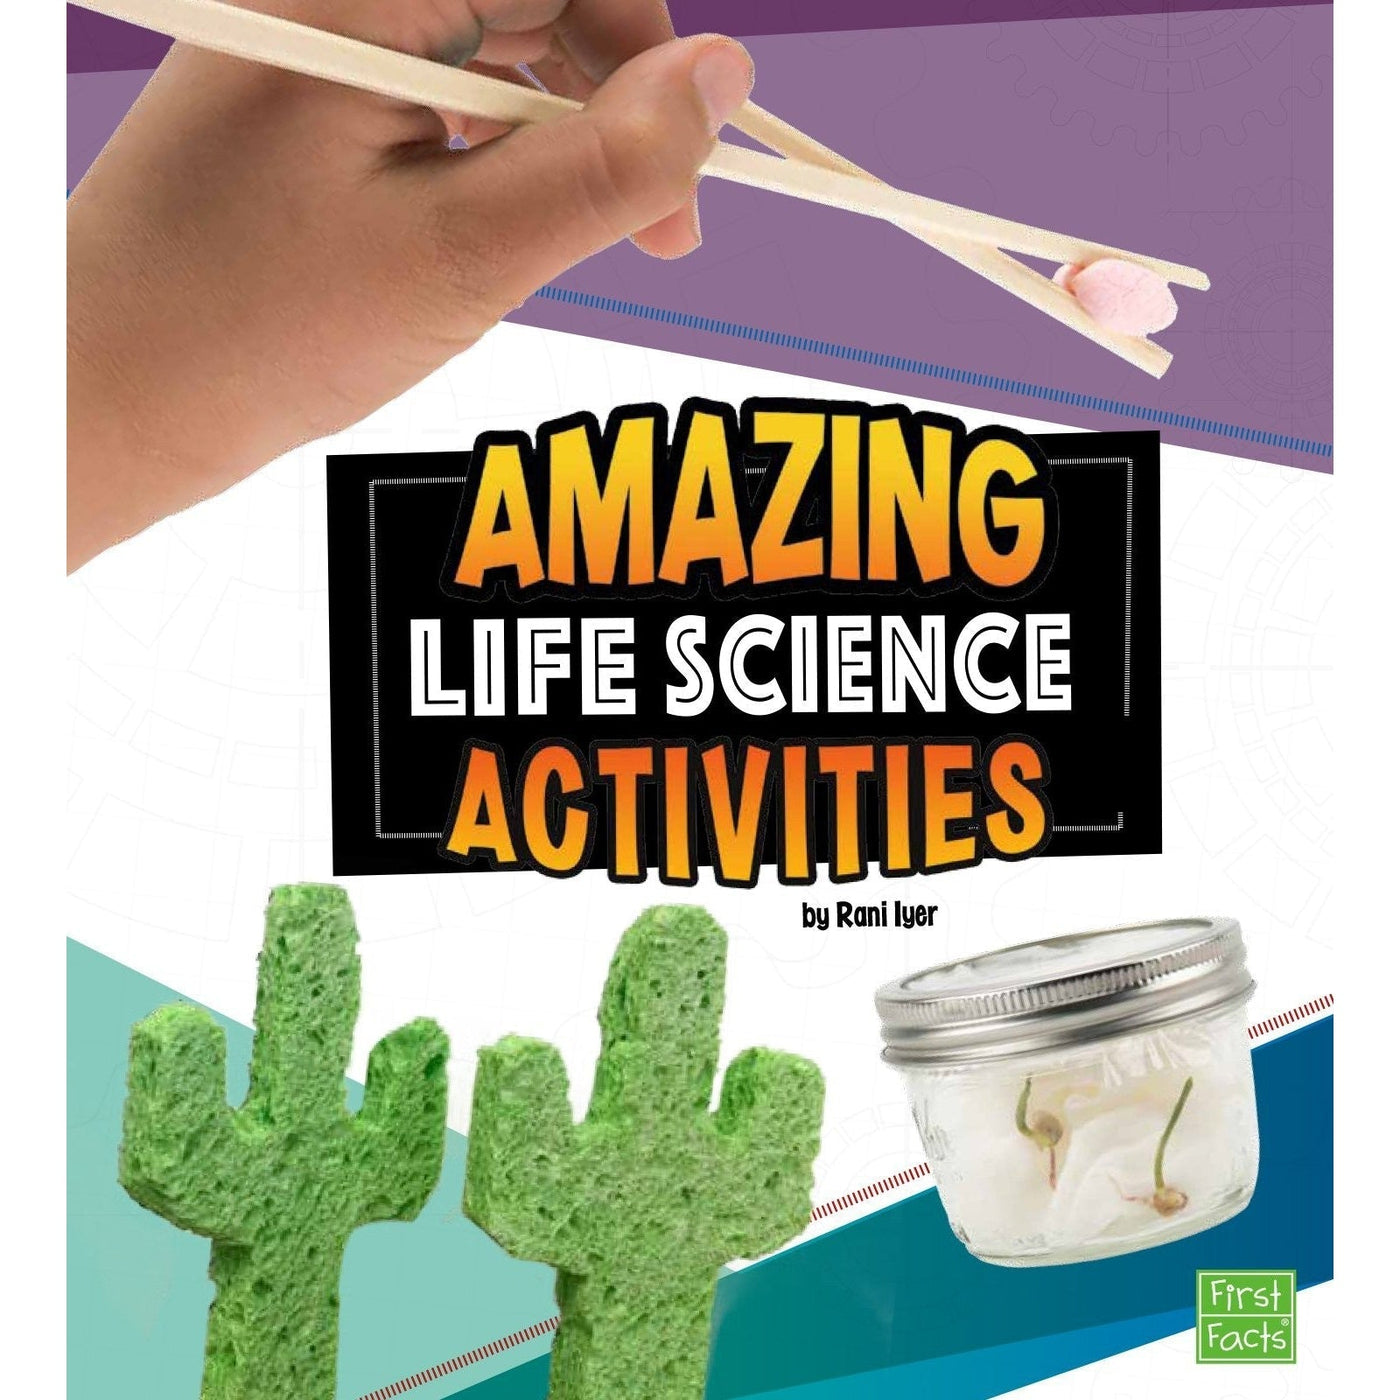 Curious Scientists: Amazing Life Science Activities - Rani Iyer